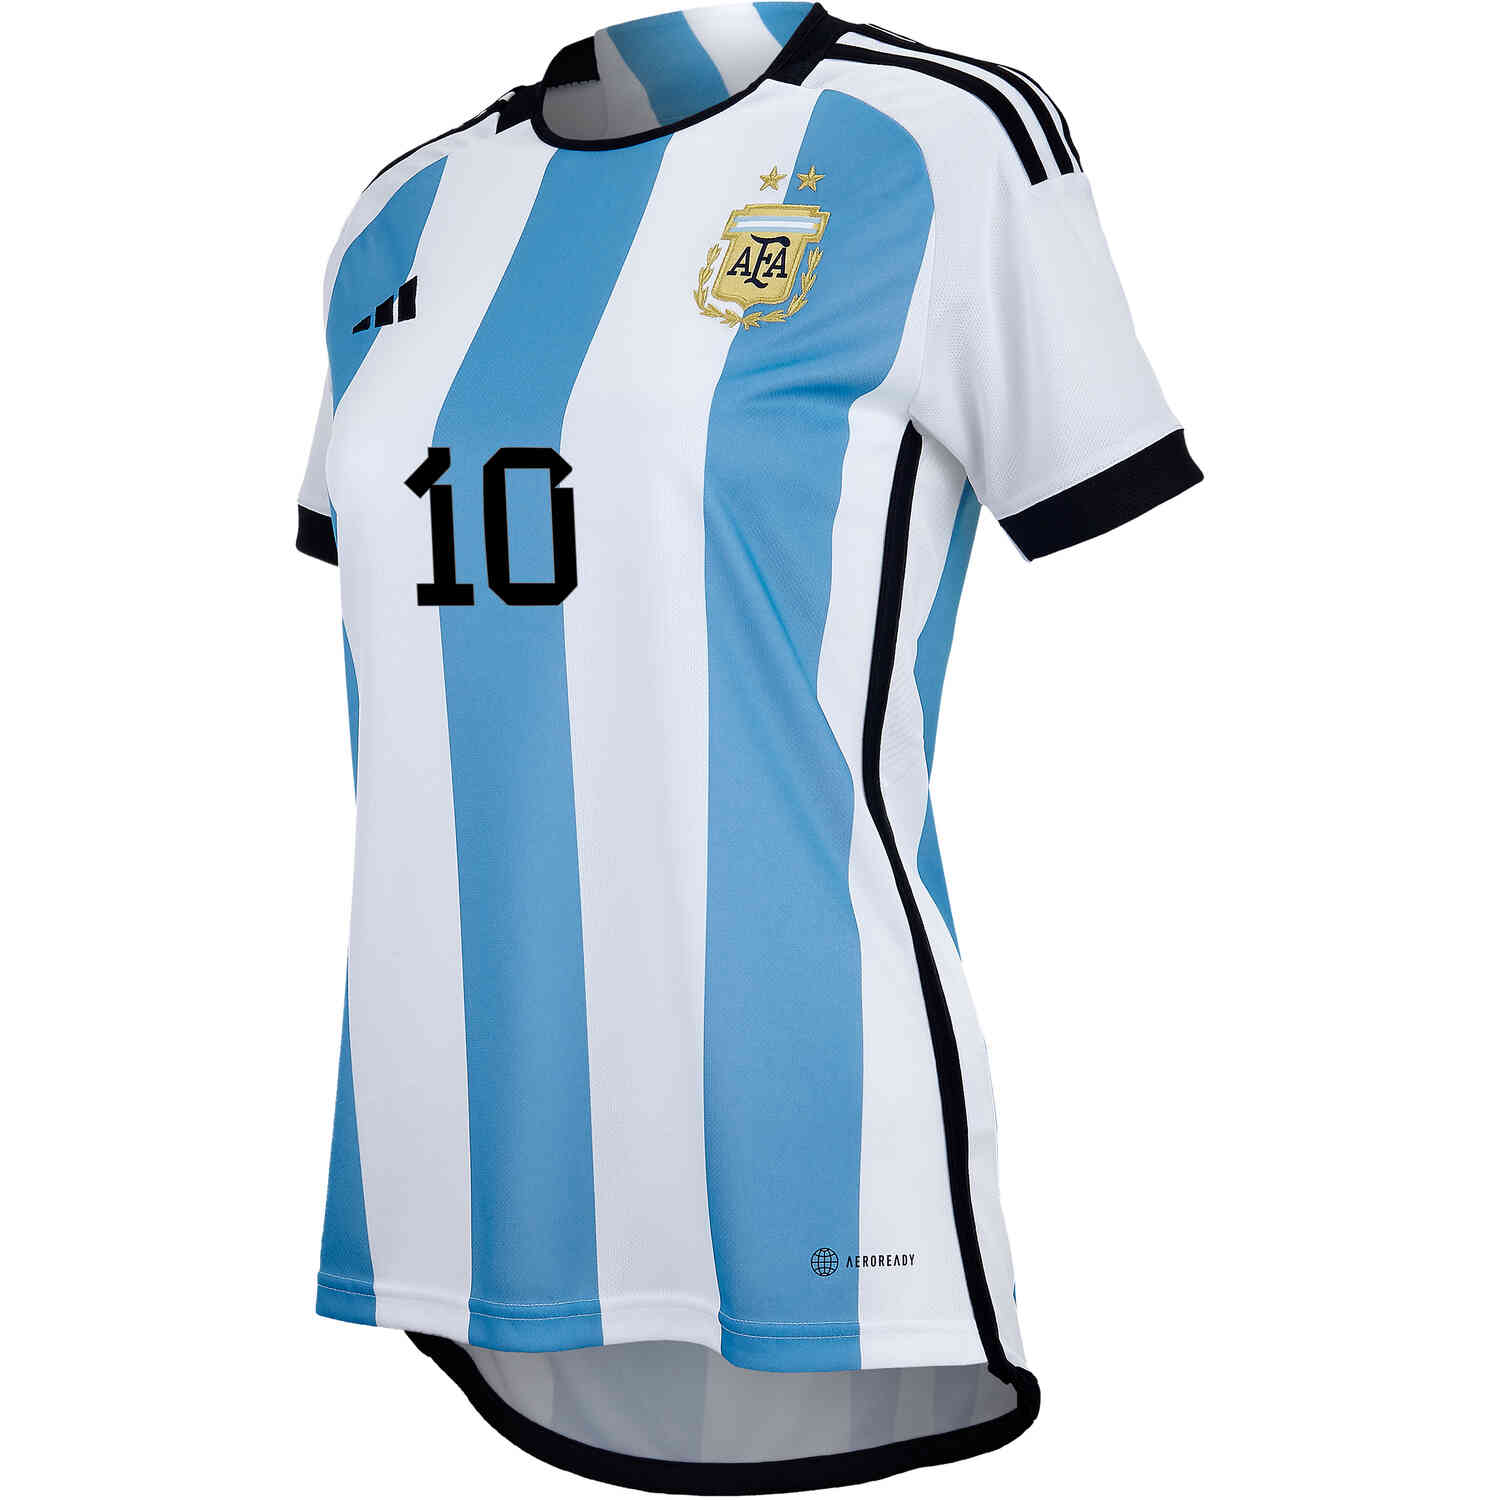 women's messi world cup jersey